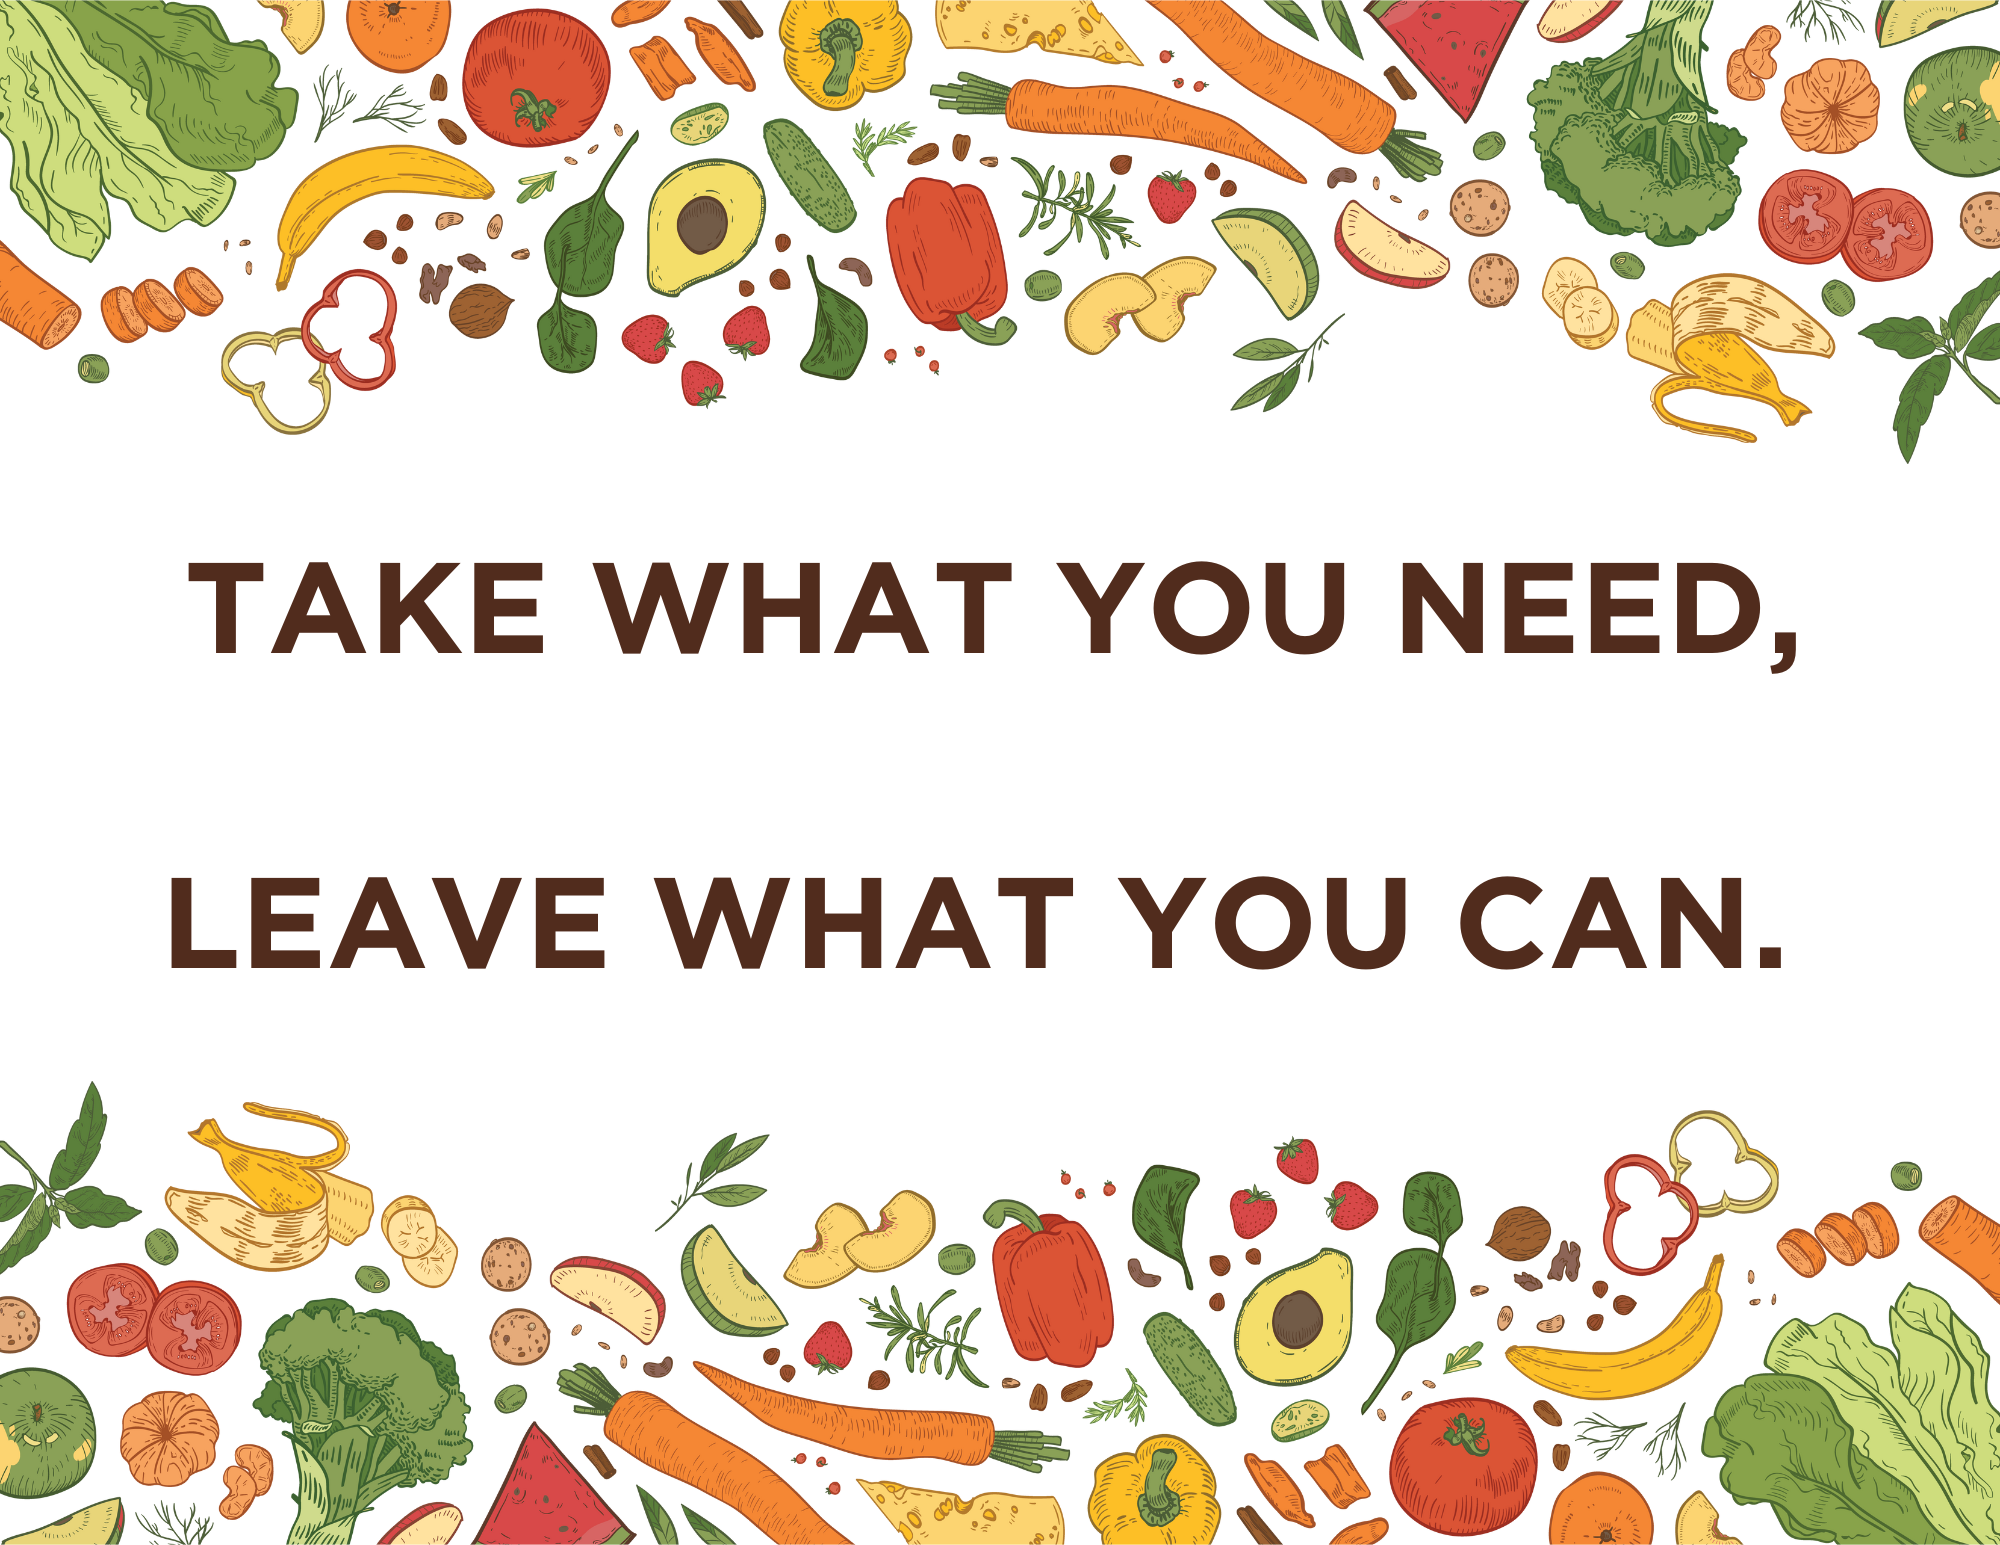 Graphic with fruits and vegetables that says take what you need leave what you can